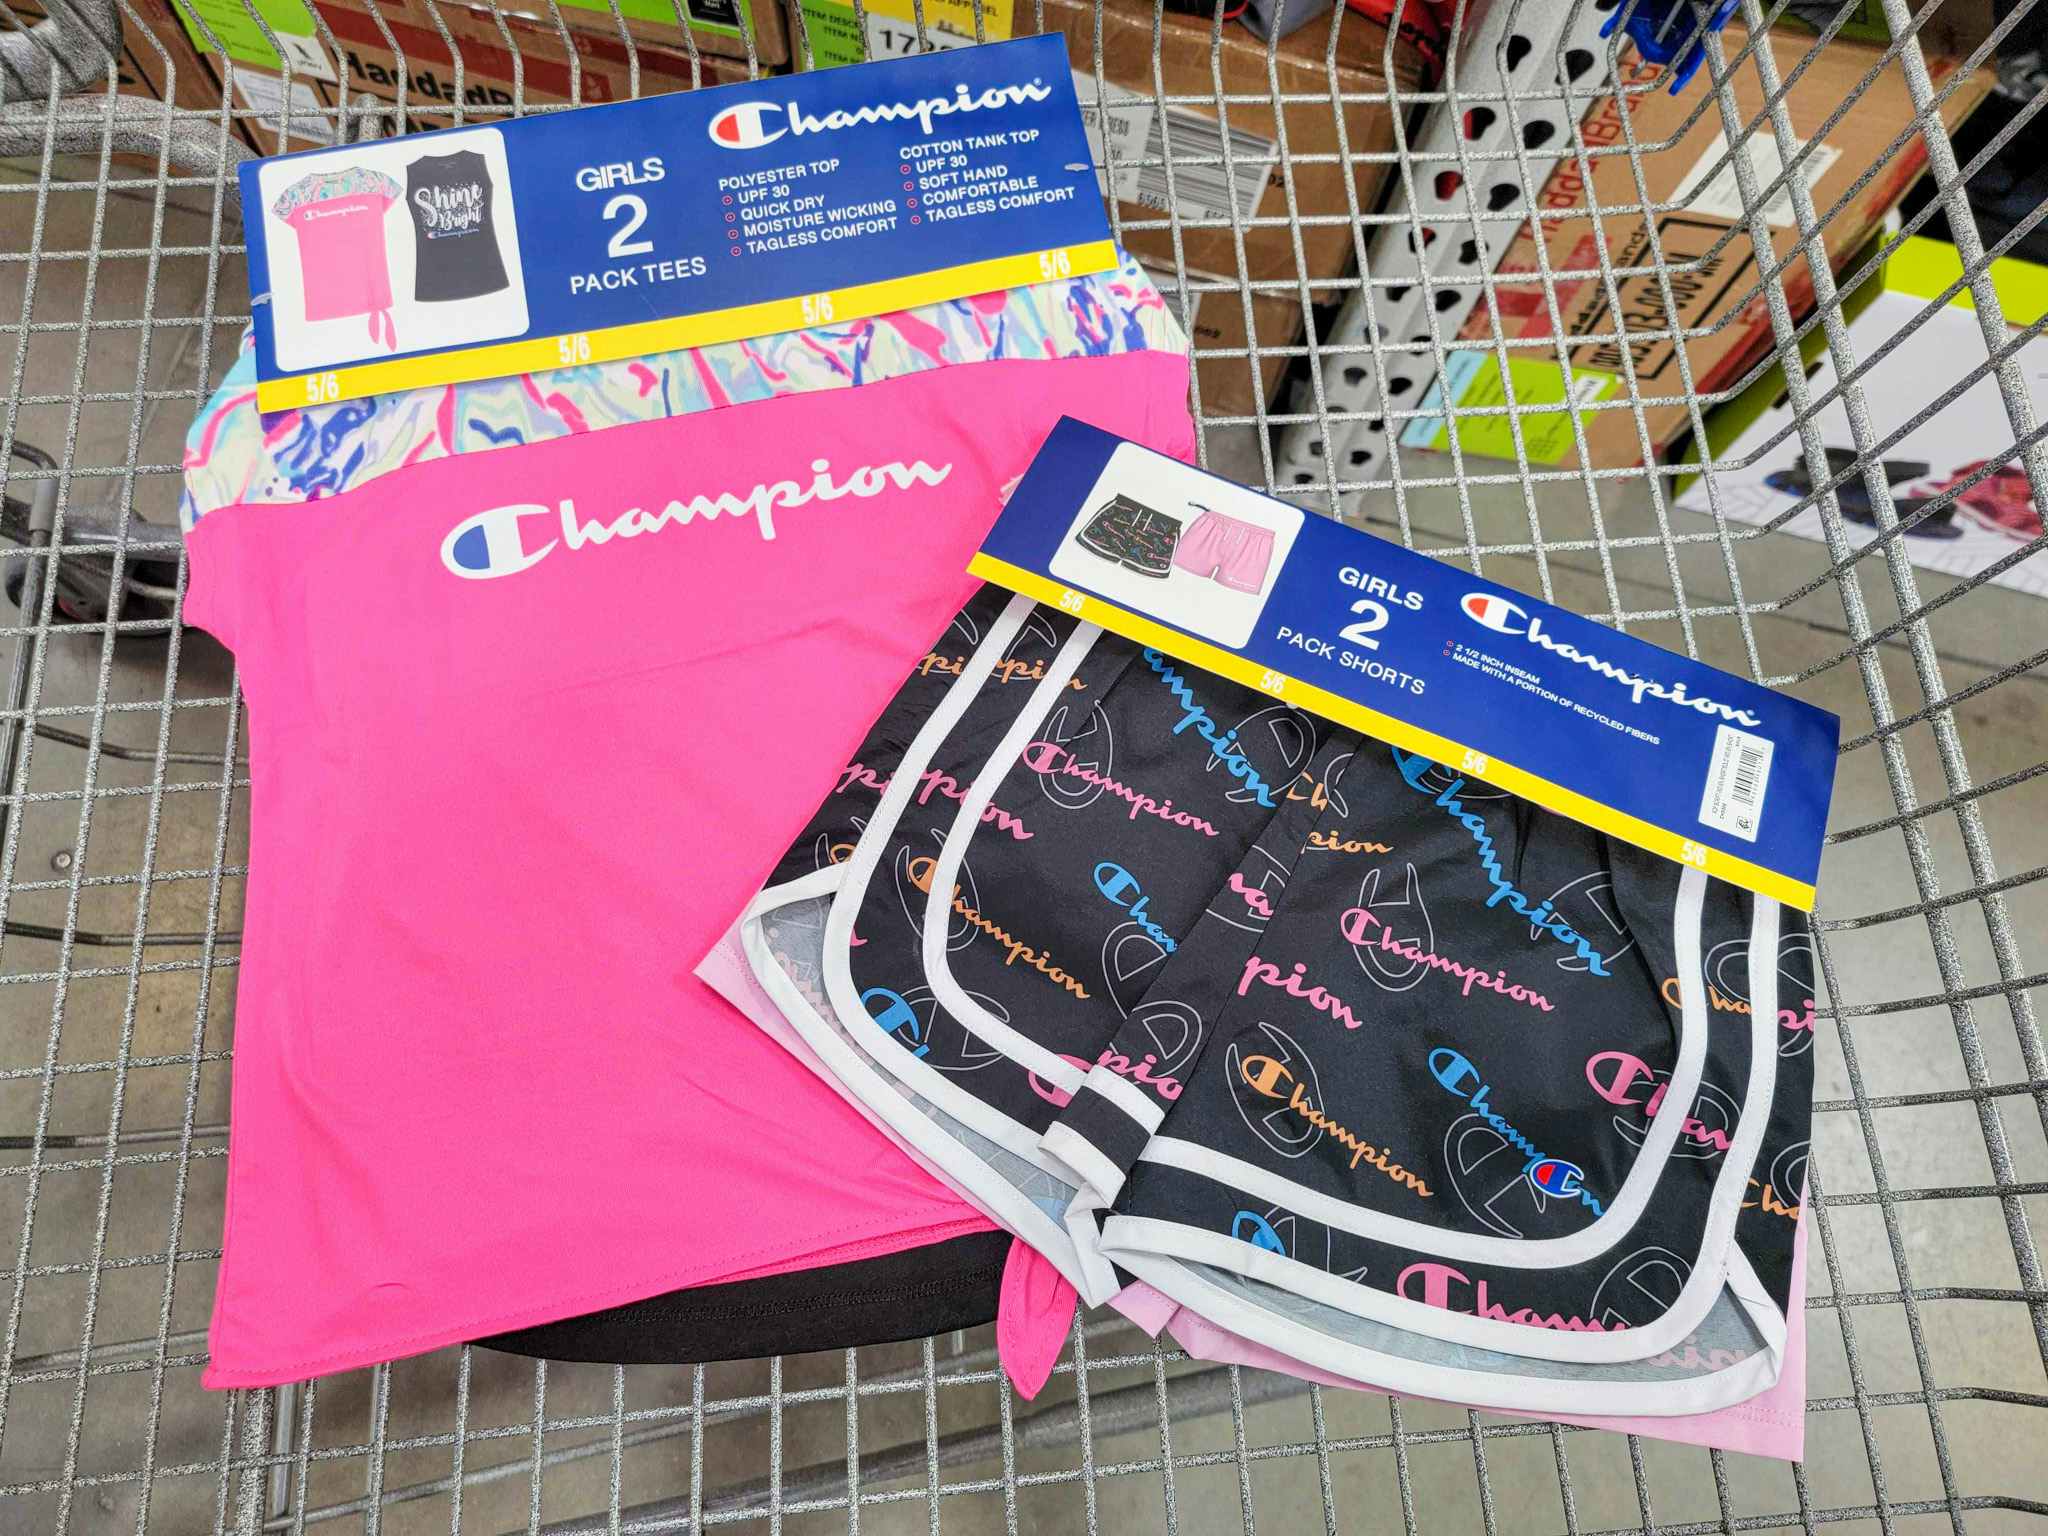 kids champion shirts and shorts in a cart